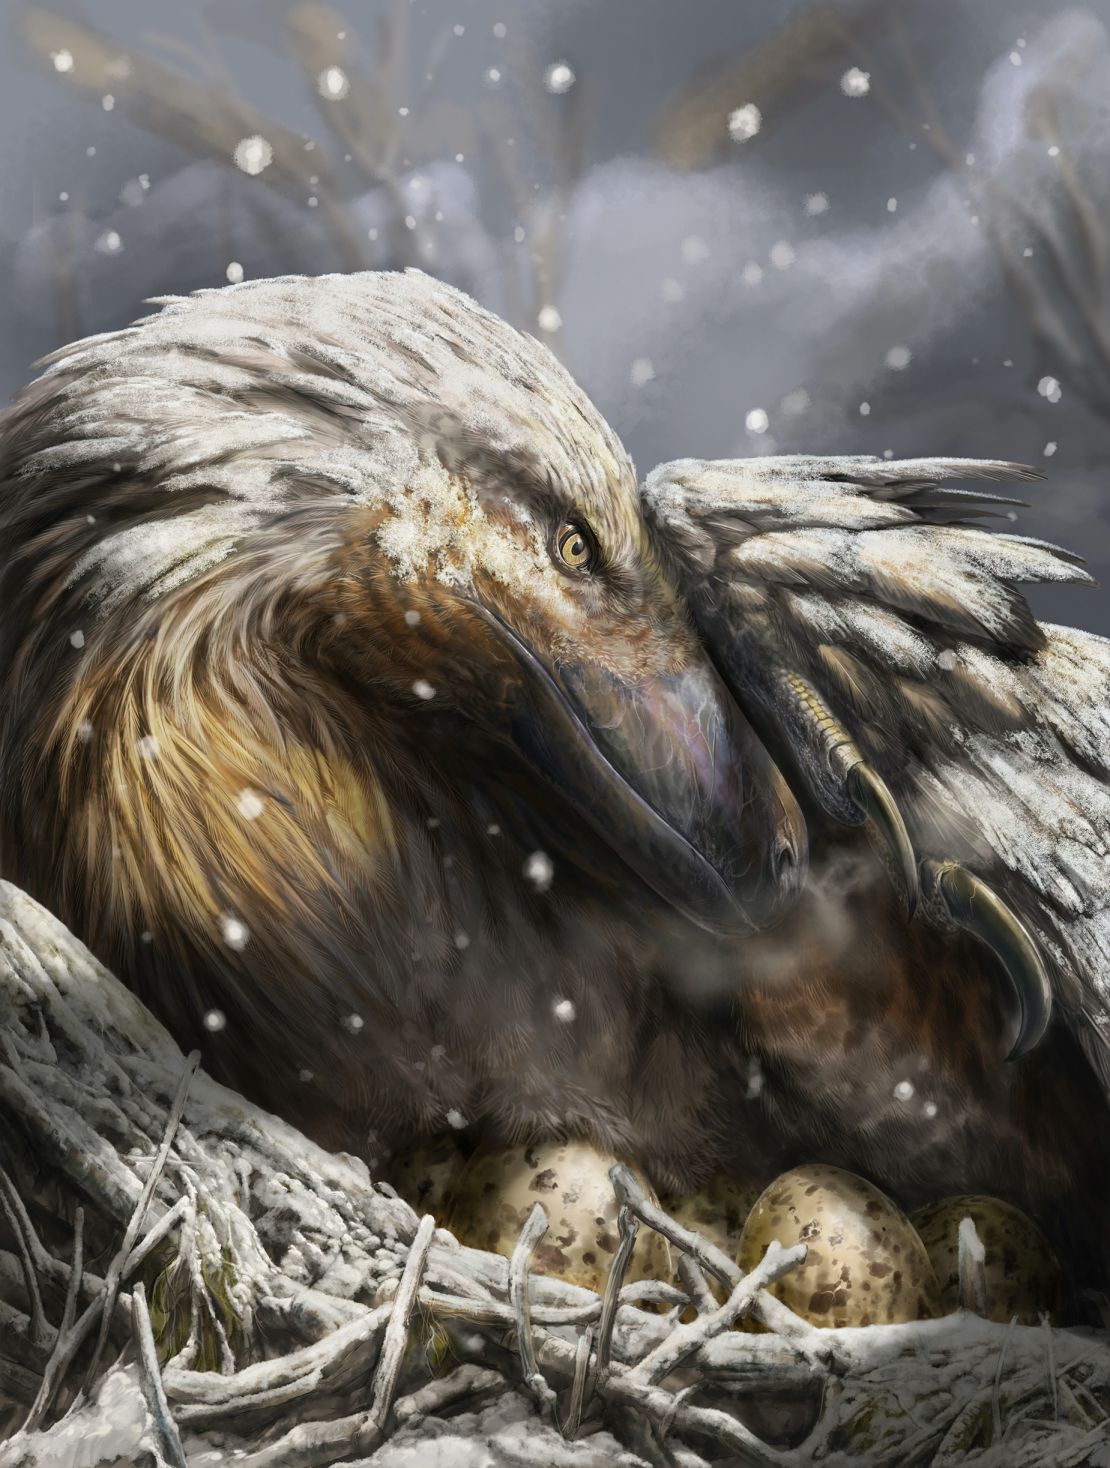 Fossils have revealed that dinosaurs lived year-round in cold climates like the Arctic.